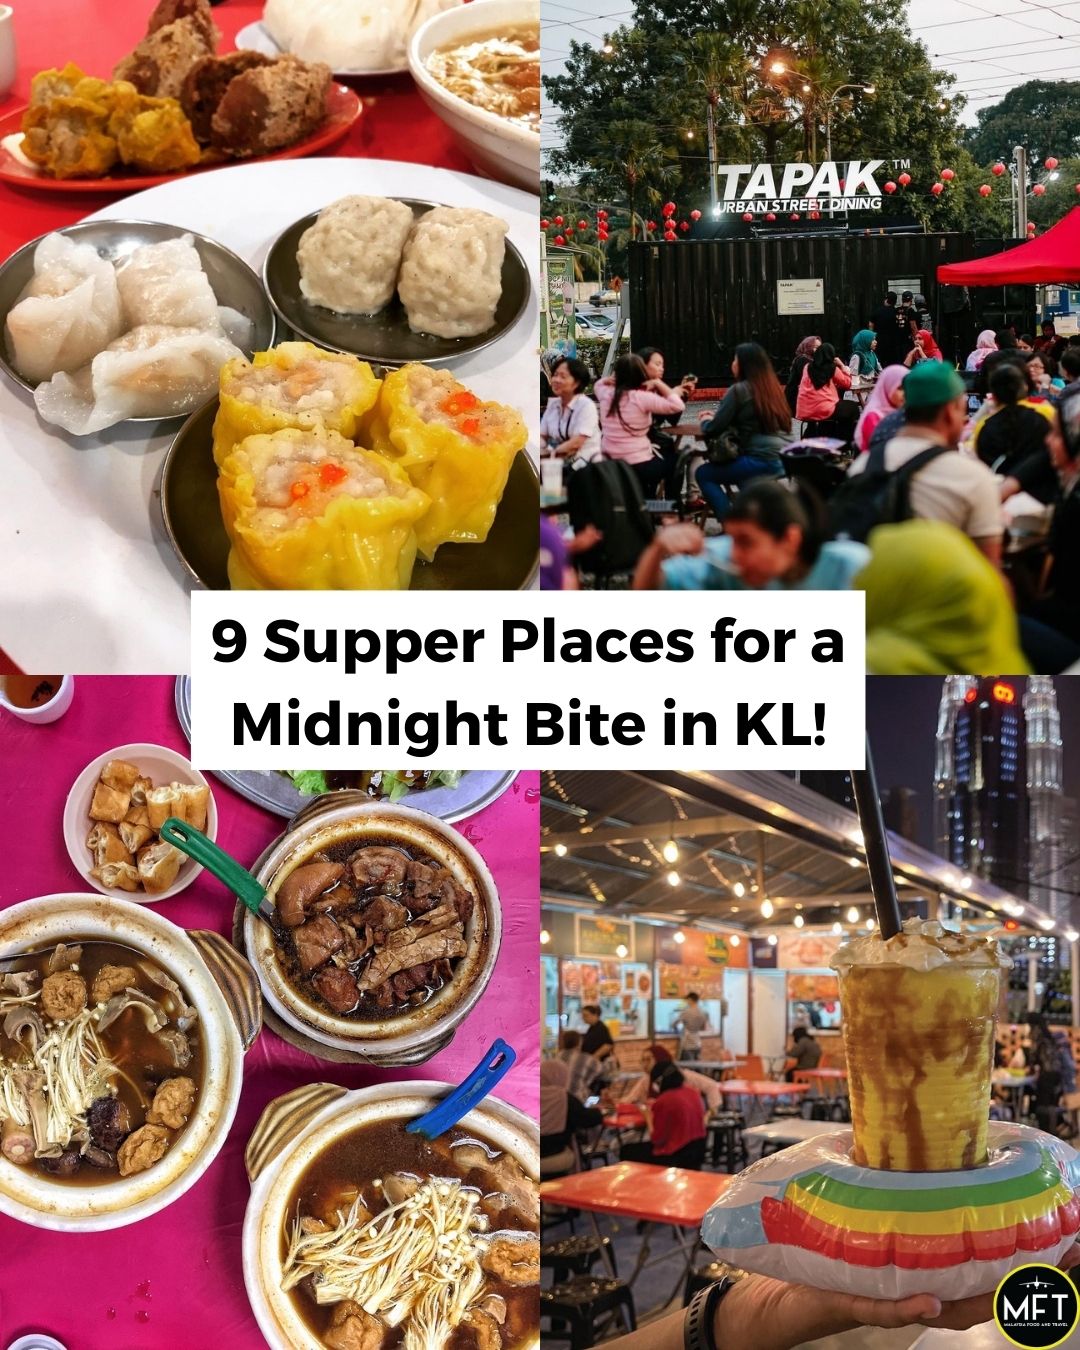 9 Supper Places for a Midnight Bite in KL!